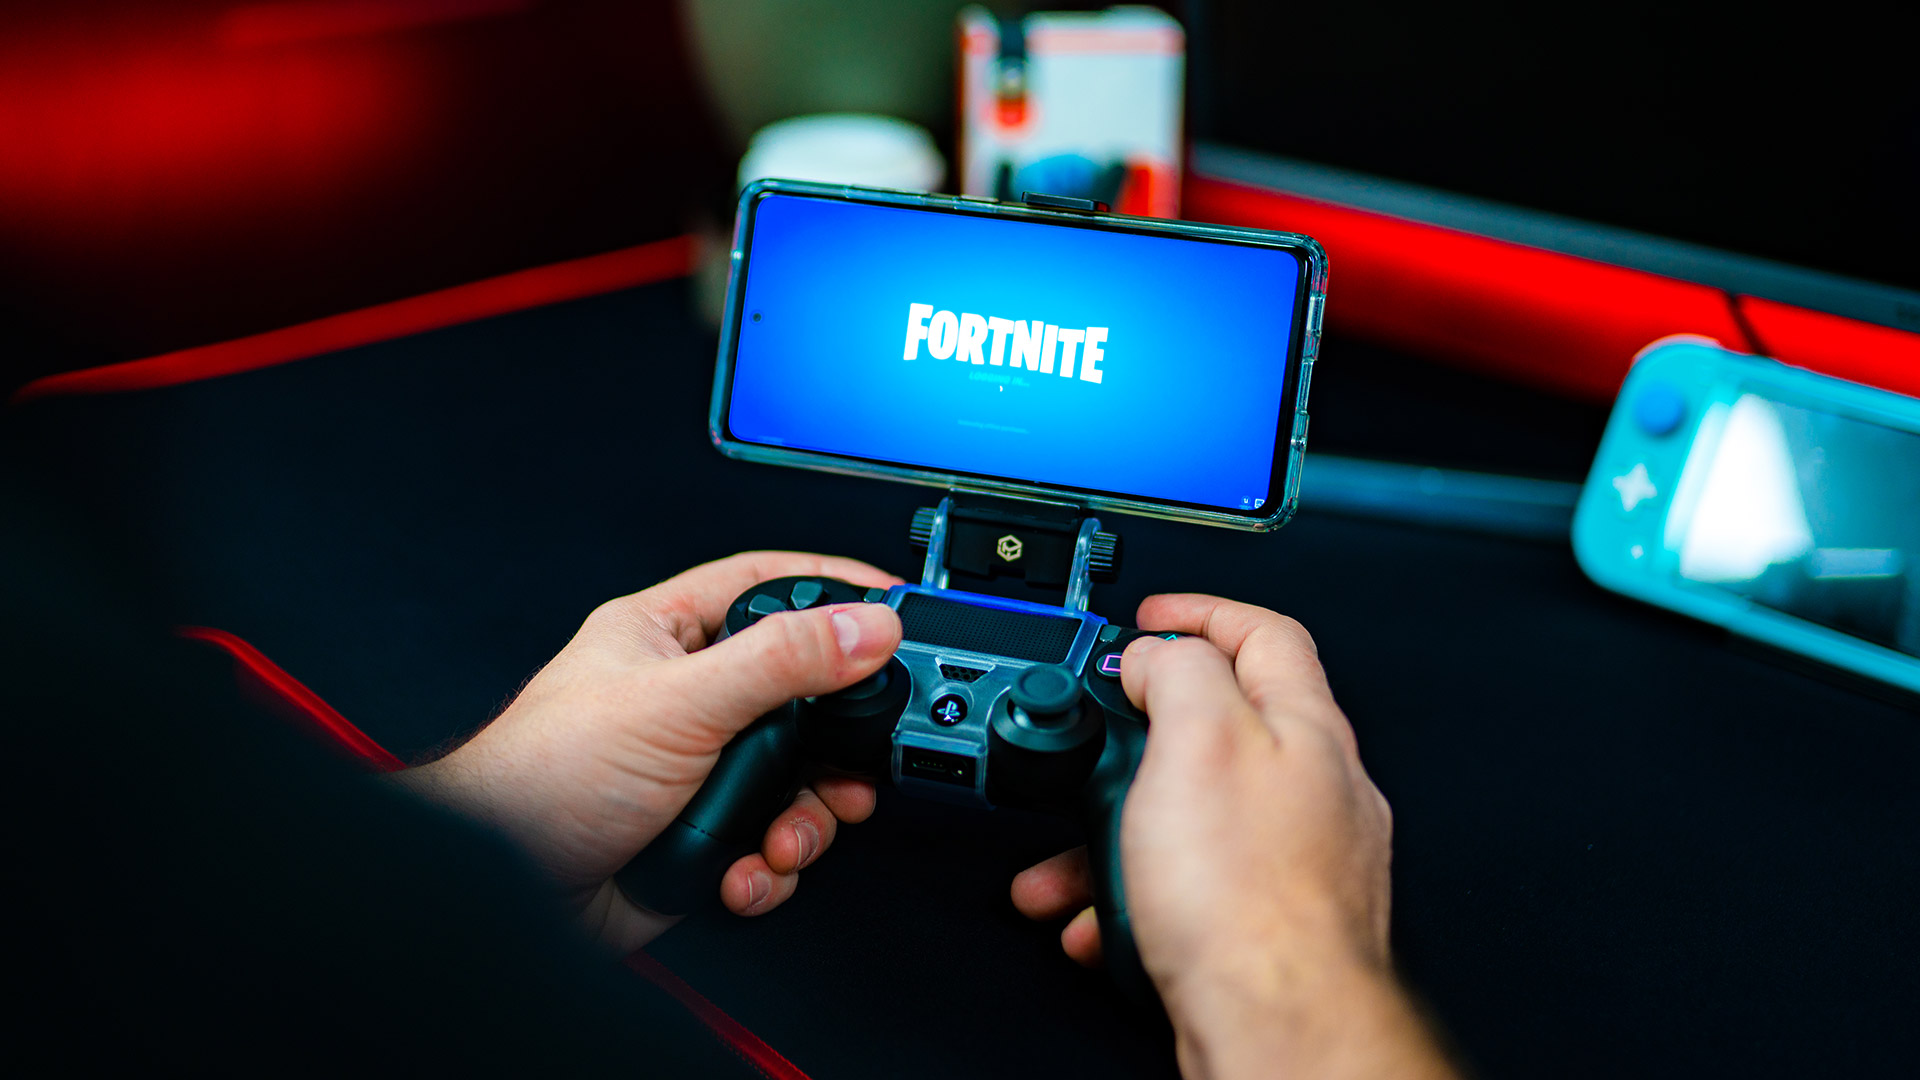 How Play Fortnite On Mobile